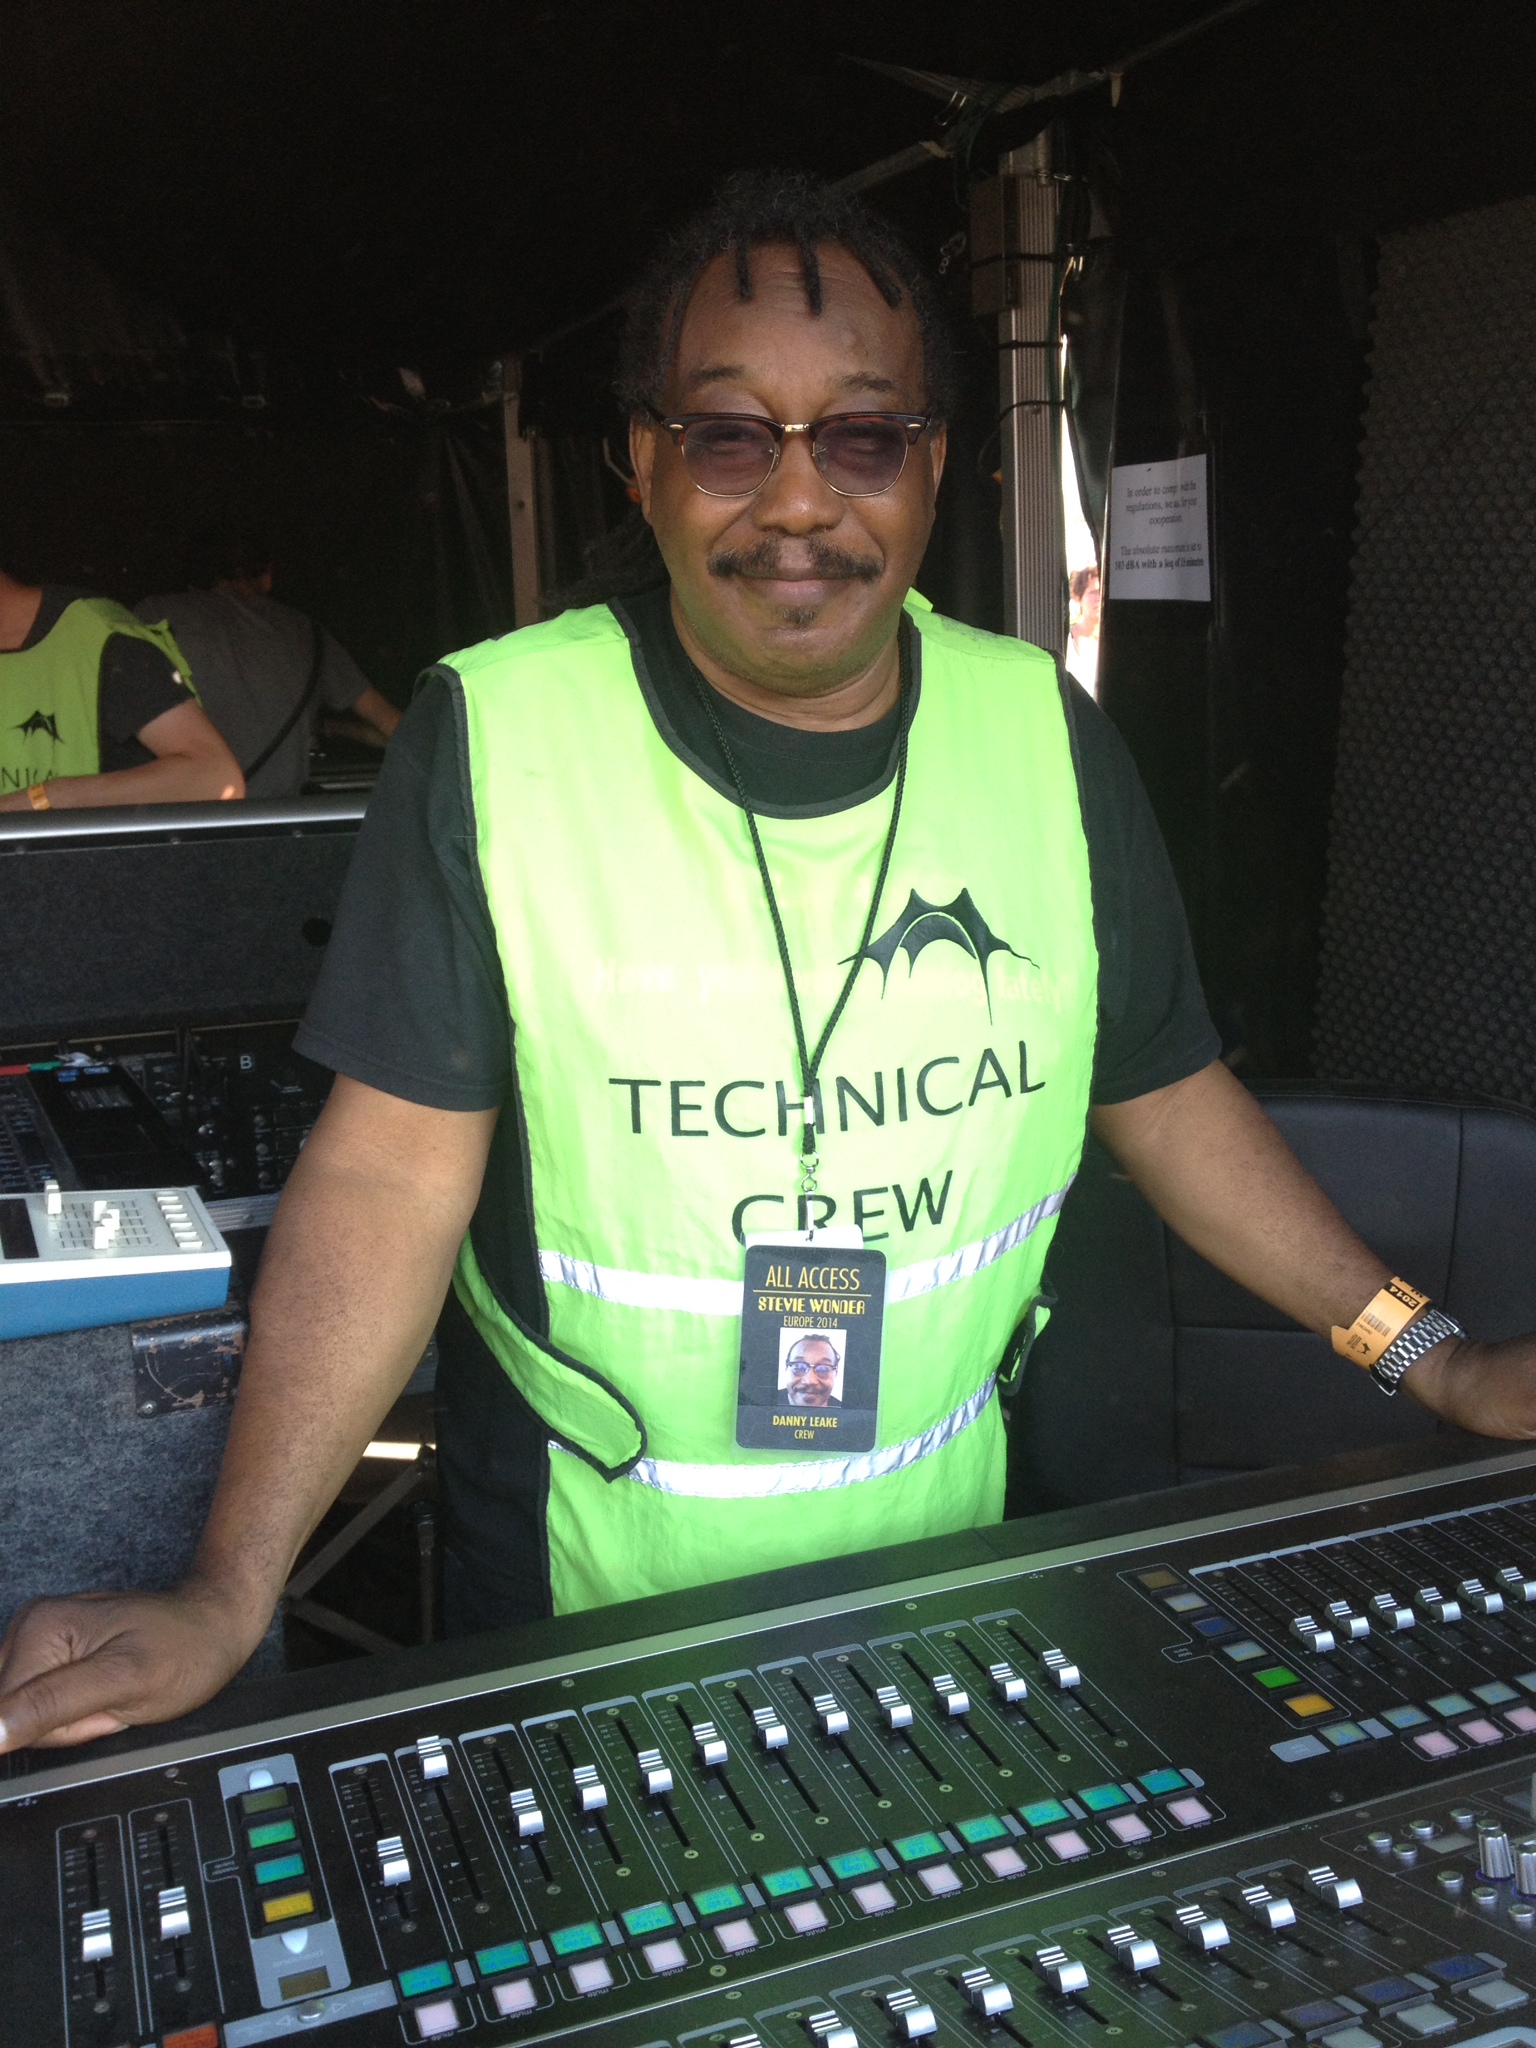 Danny Leake, who has been Stevie Wonder's FOH engineer for 22 years, is responsible for providing a spectacular audio infrastructure for each of the shows.